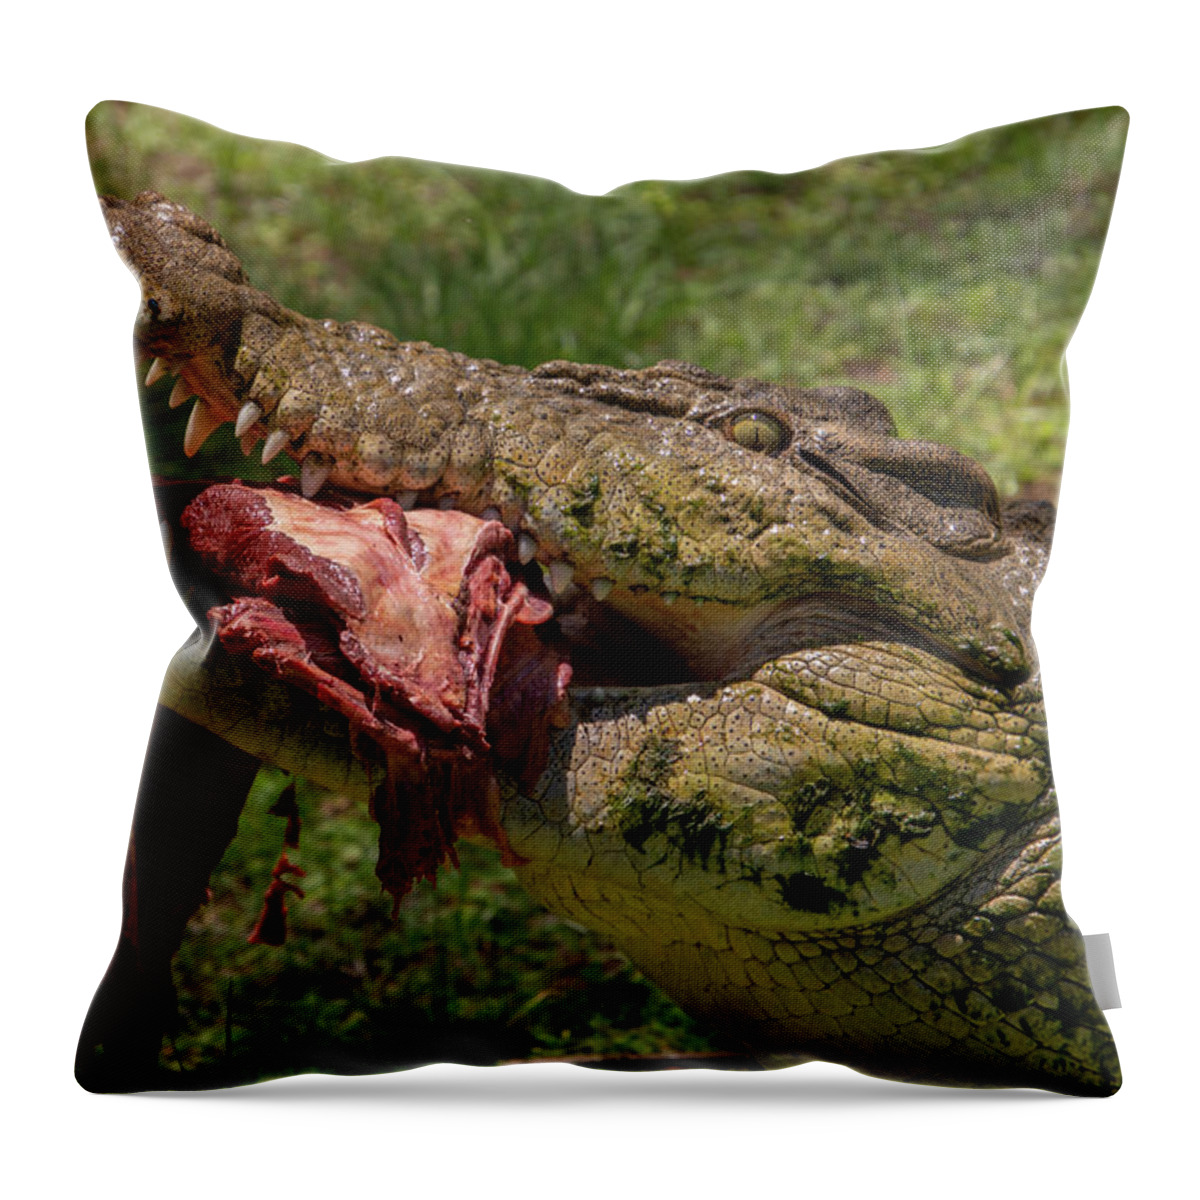 Saltwater Throw Pillow featuring the photograph Saltwater Crocodile Eating by Carolyn Hutchins